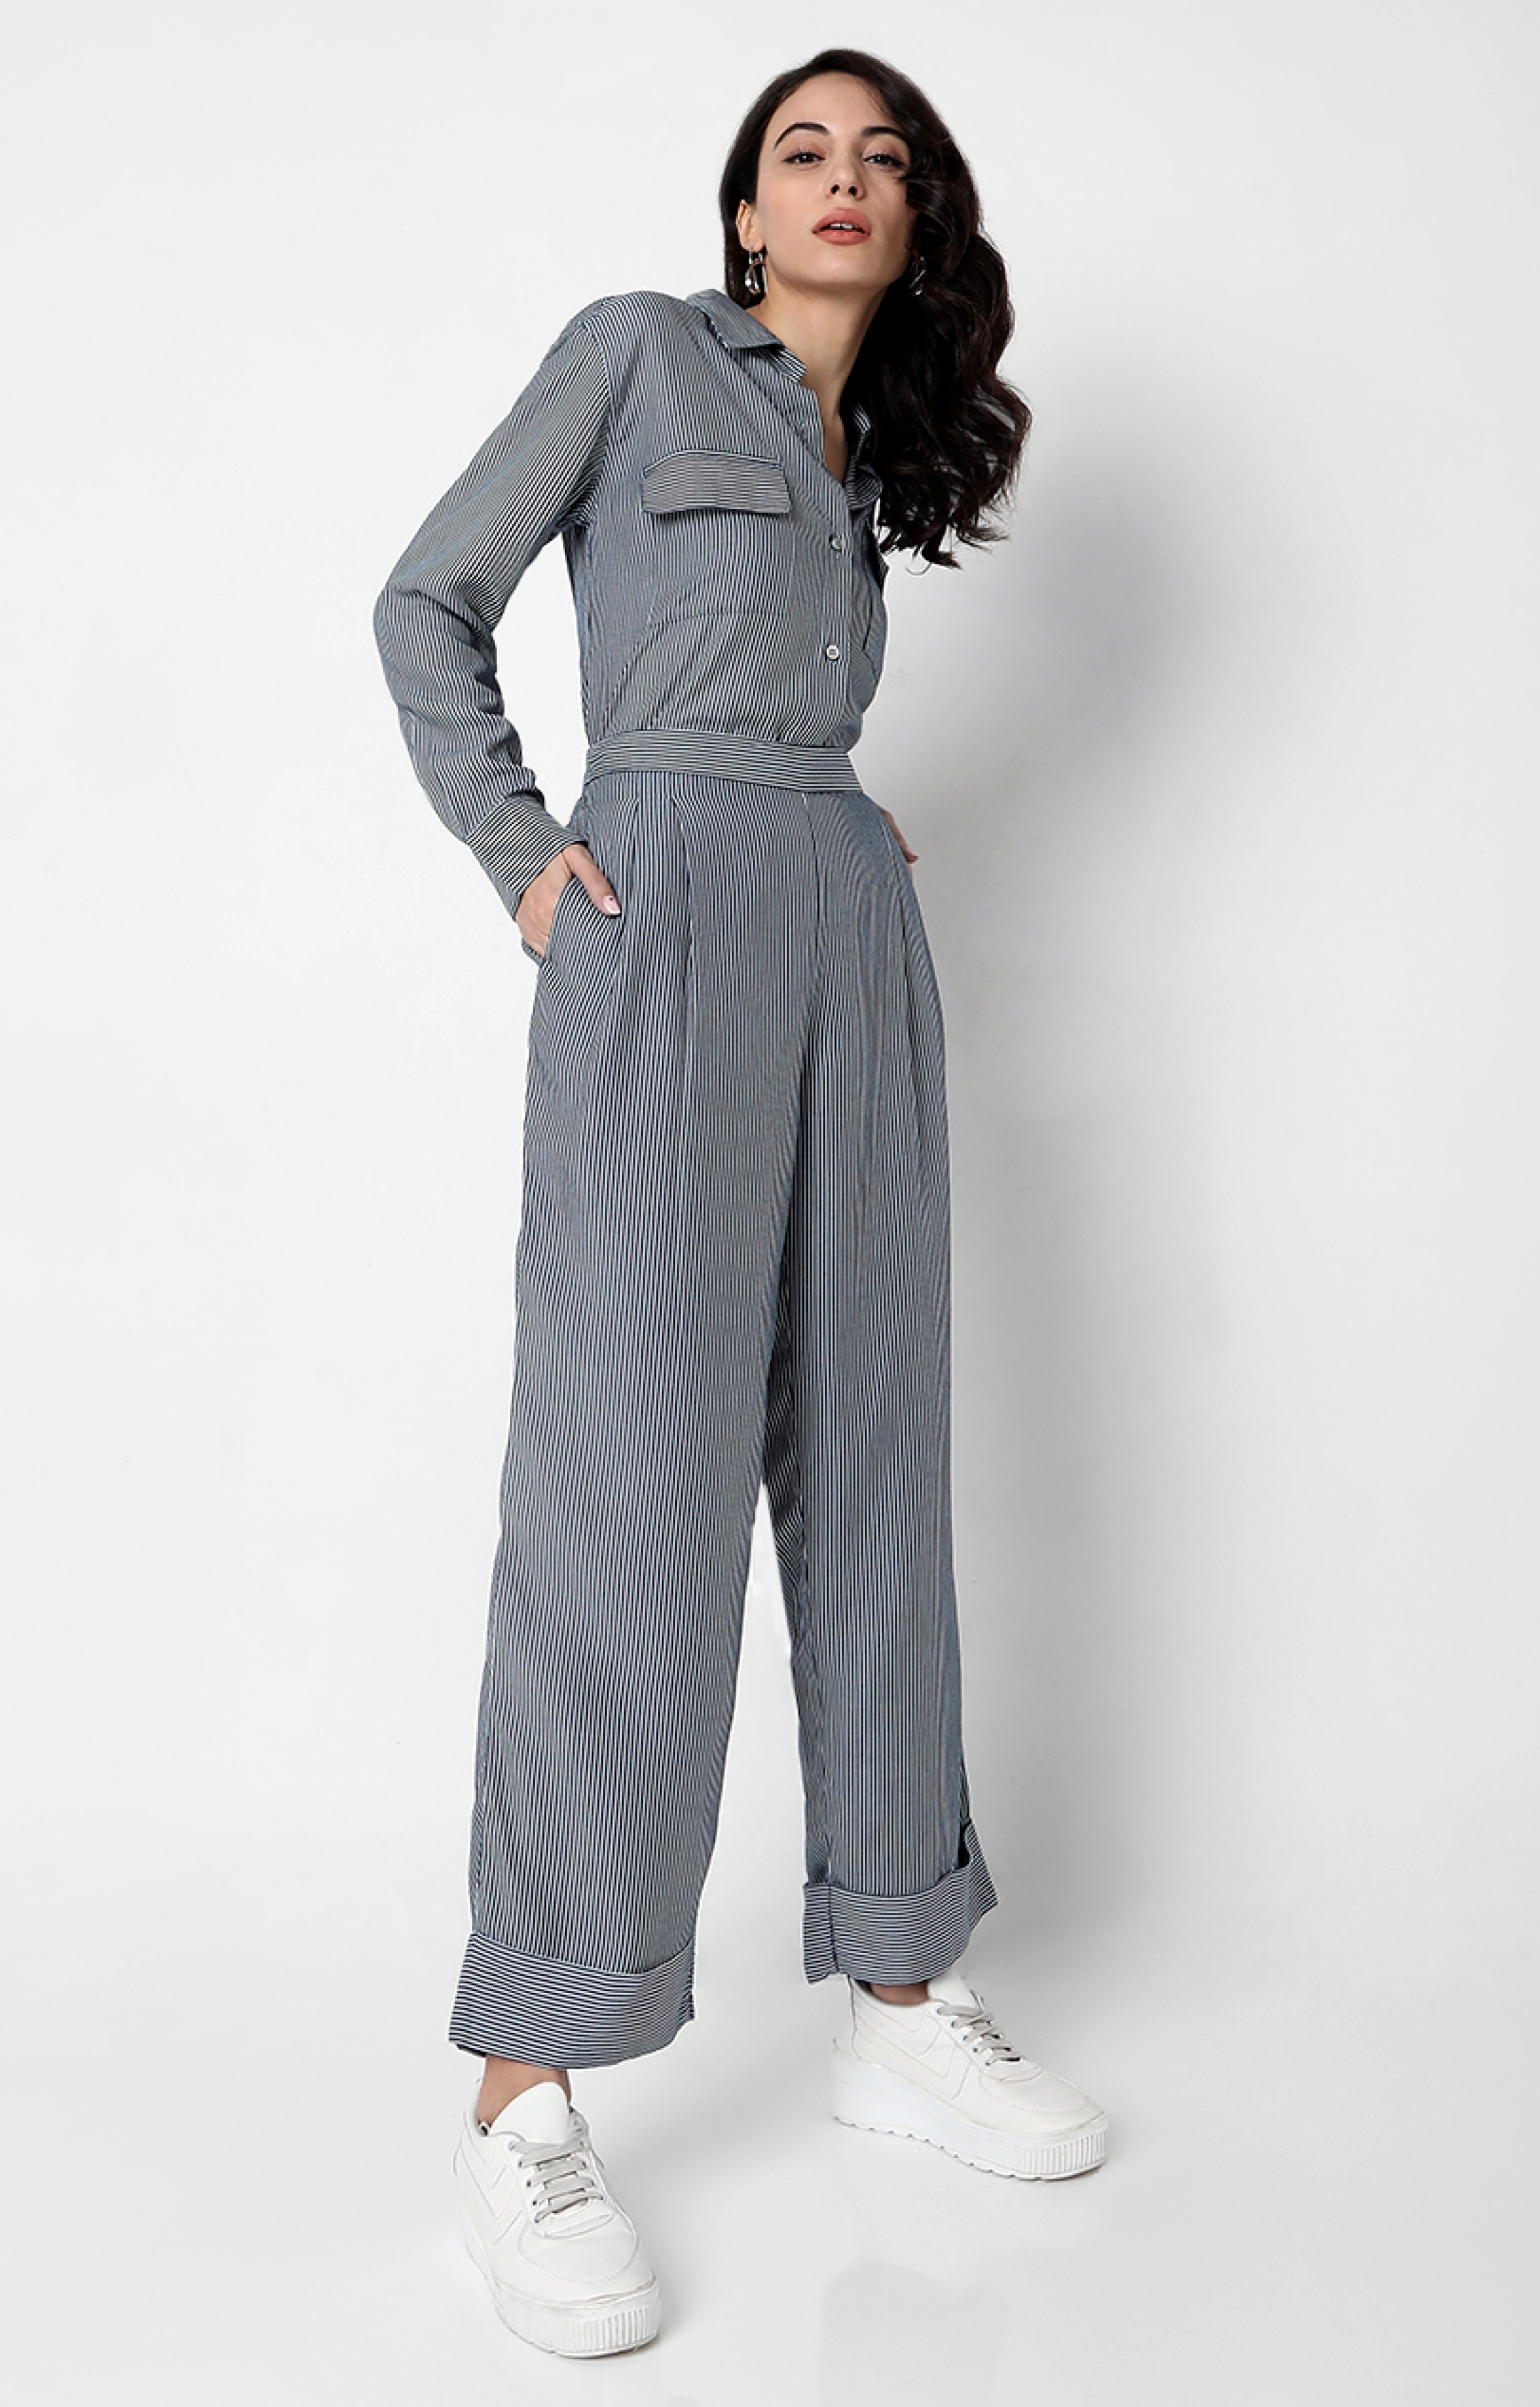 Pinstripe co-ord - trousers